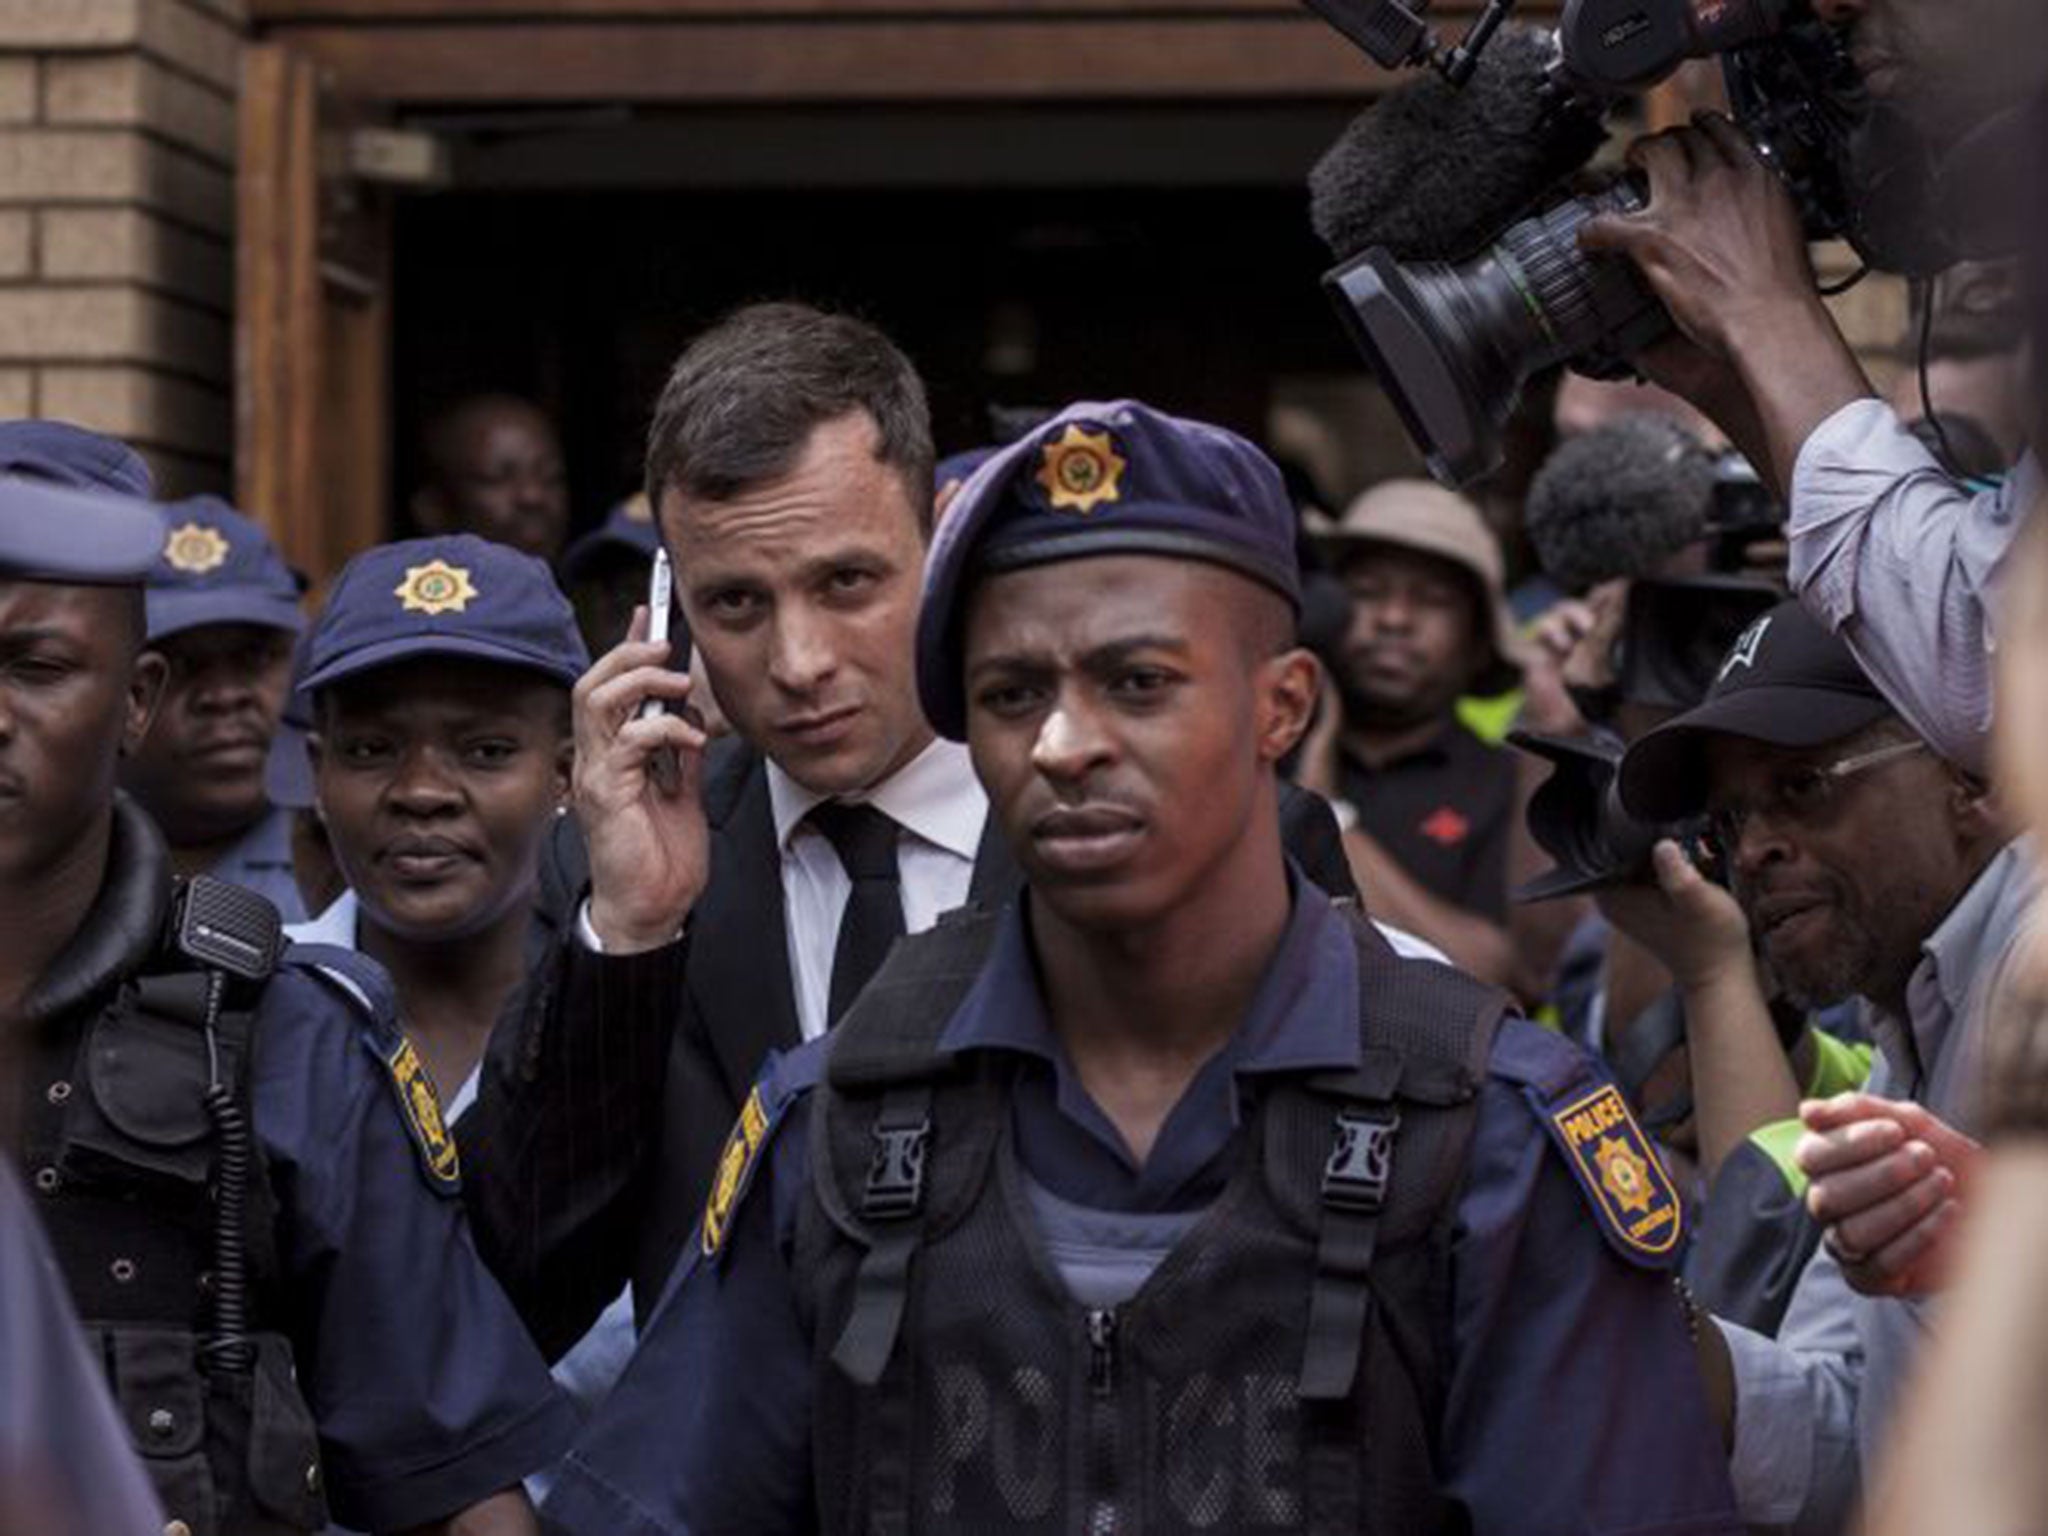 Oscar Pistorius leaving North Gauteng High Court on Monday. The athlete could face just three years' house arrest for killing his girlfriend Reeva Steenkamp